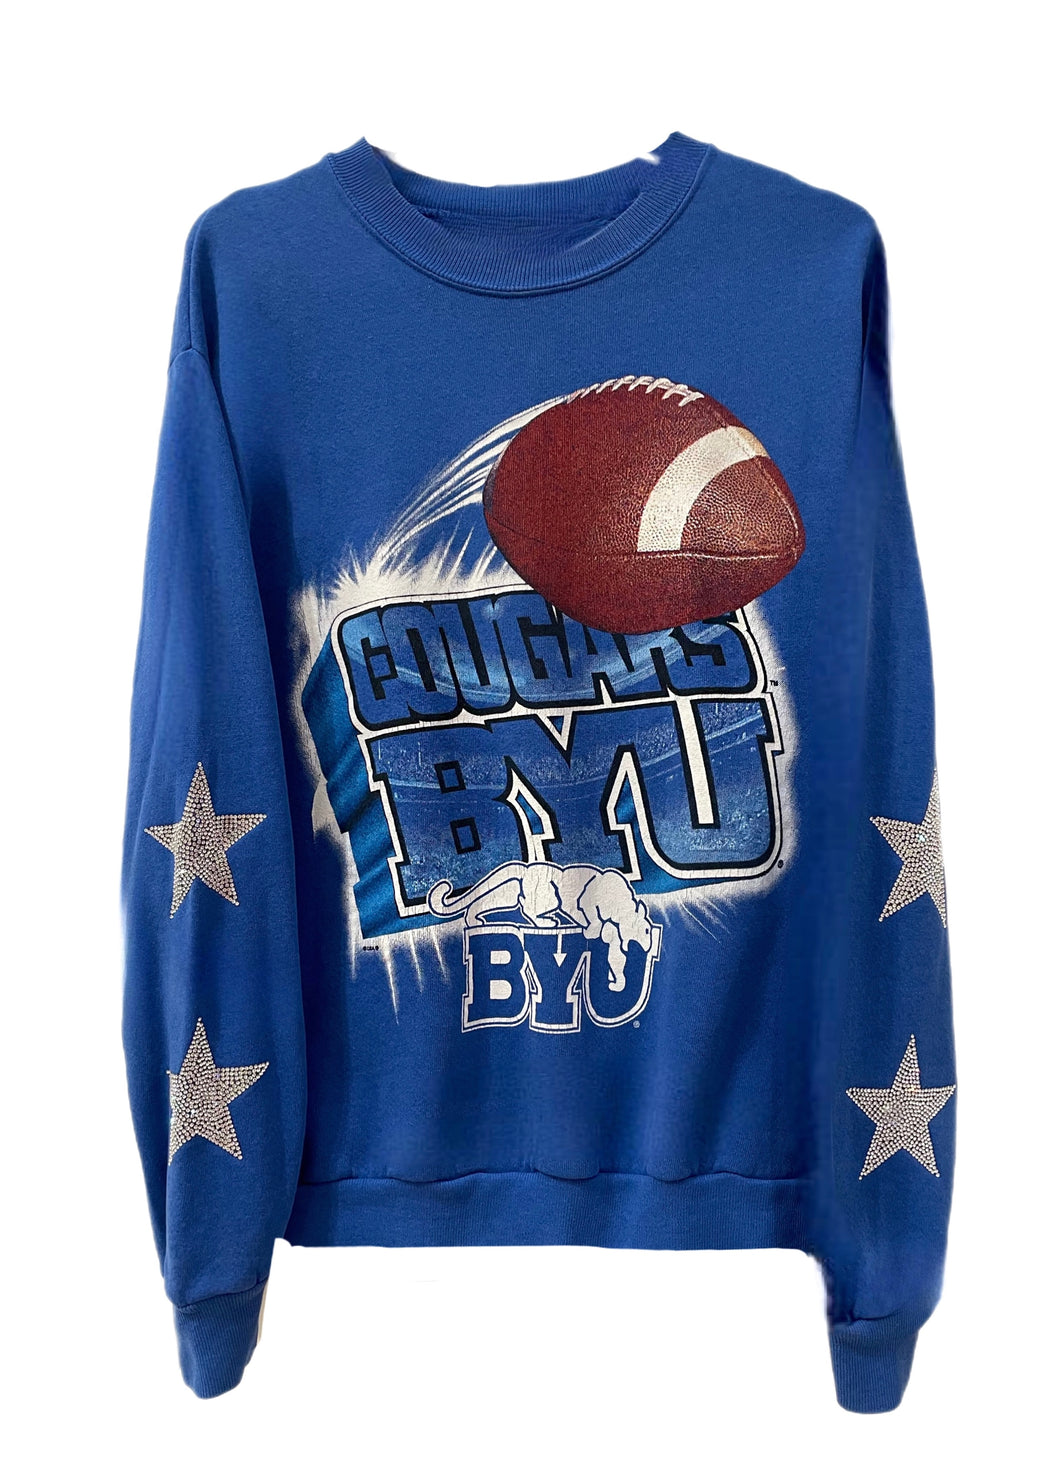 Brigham Young University, One of a KIND Vintage BYU Cougars Sweatshirt with Crystal Star Design